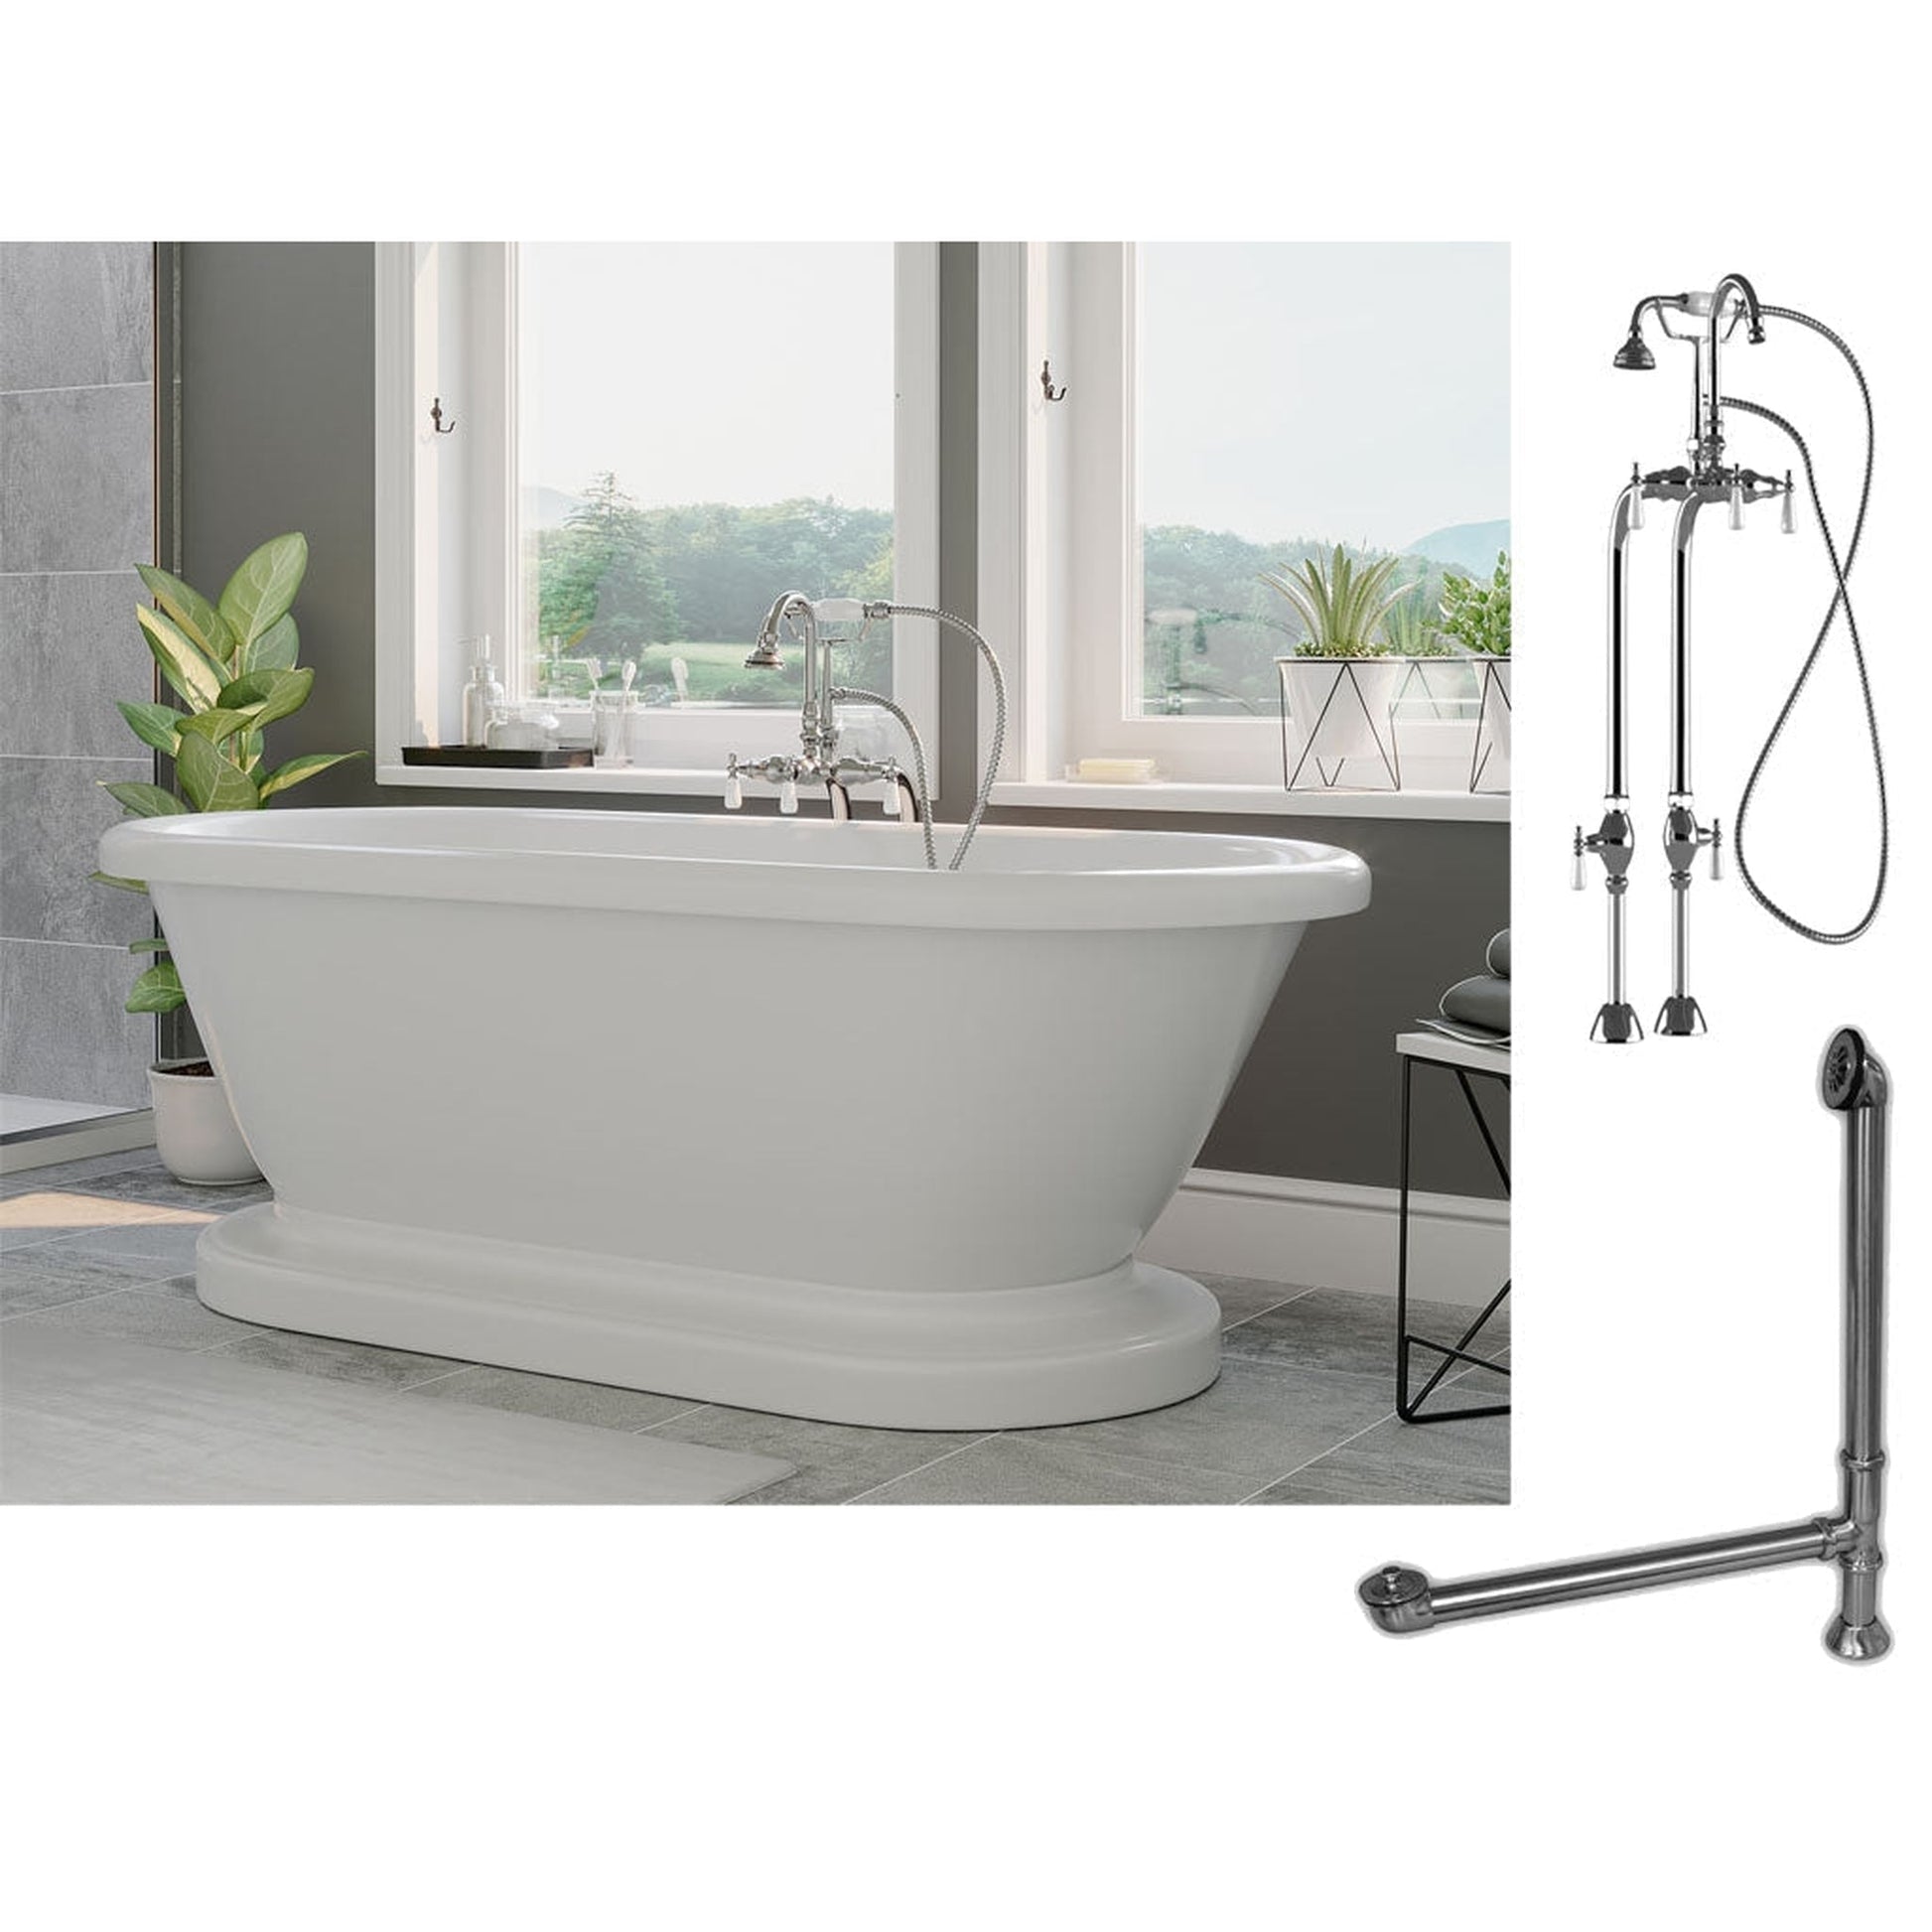 Cambridge Plumbing 70" White Acrylic Double Ended Pedestal Bathtub With No Deck Holes And Complete Plumbing Package Including Freestanding English Telephone Gooseneck Faucet , Drain And Overflow Assembly In Brushed Nickel